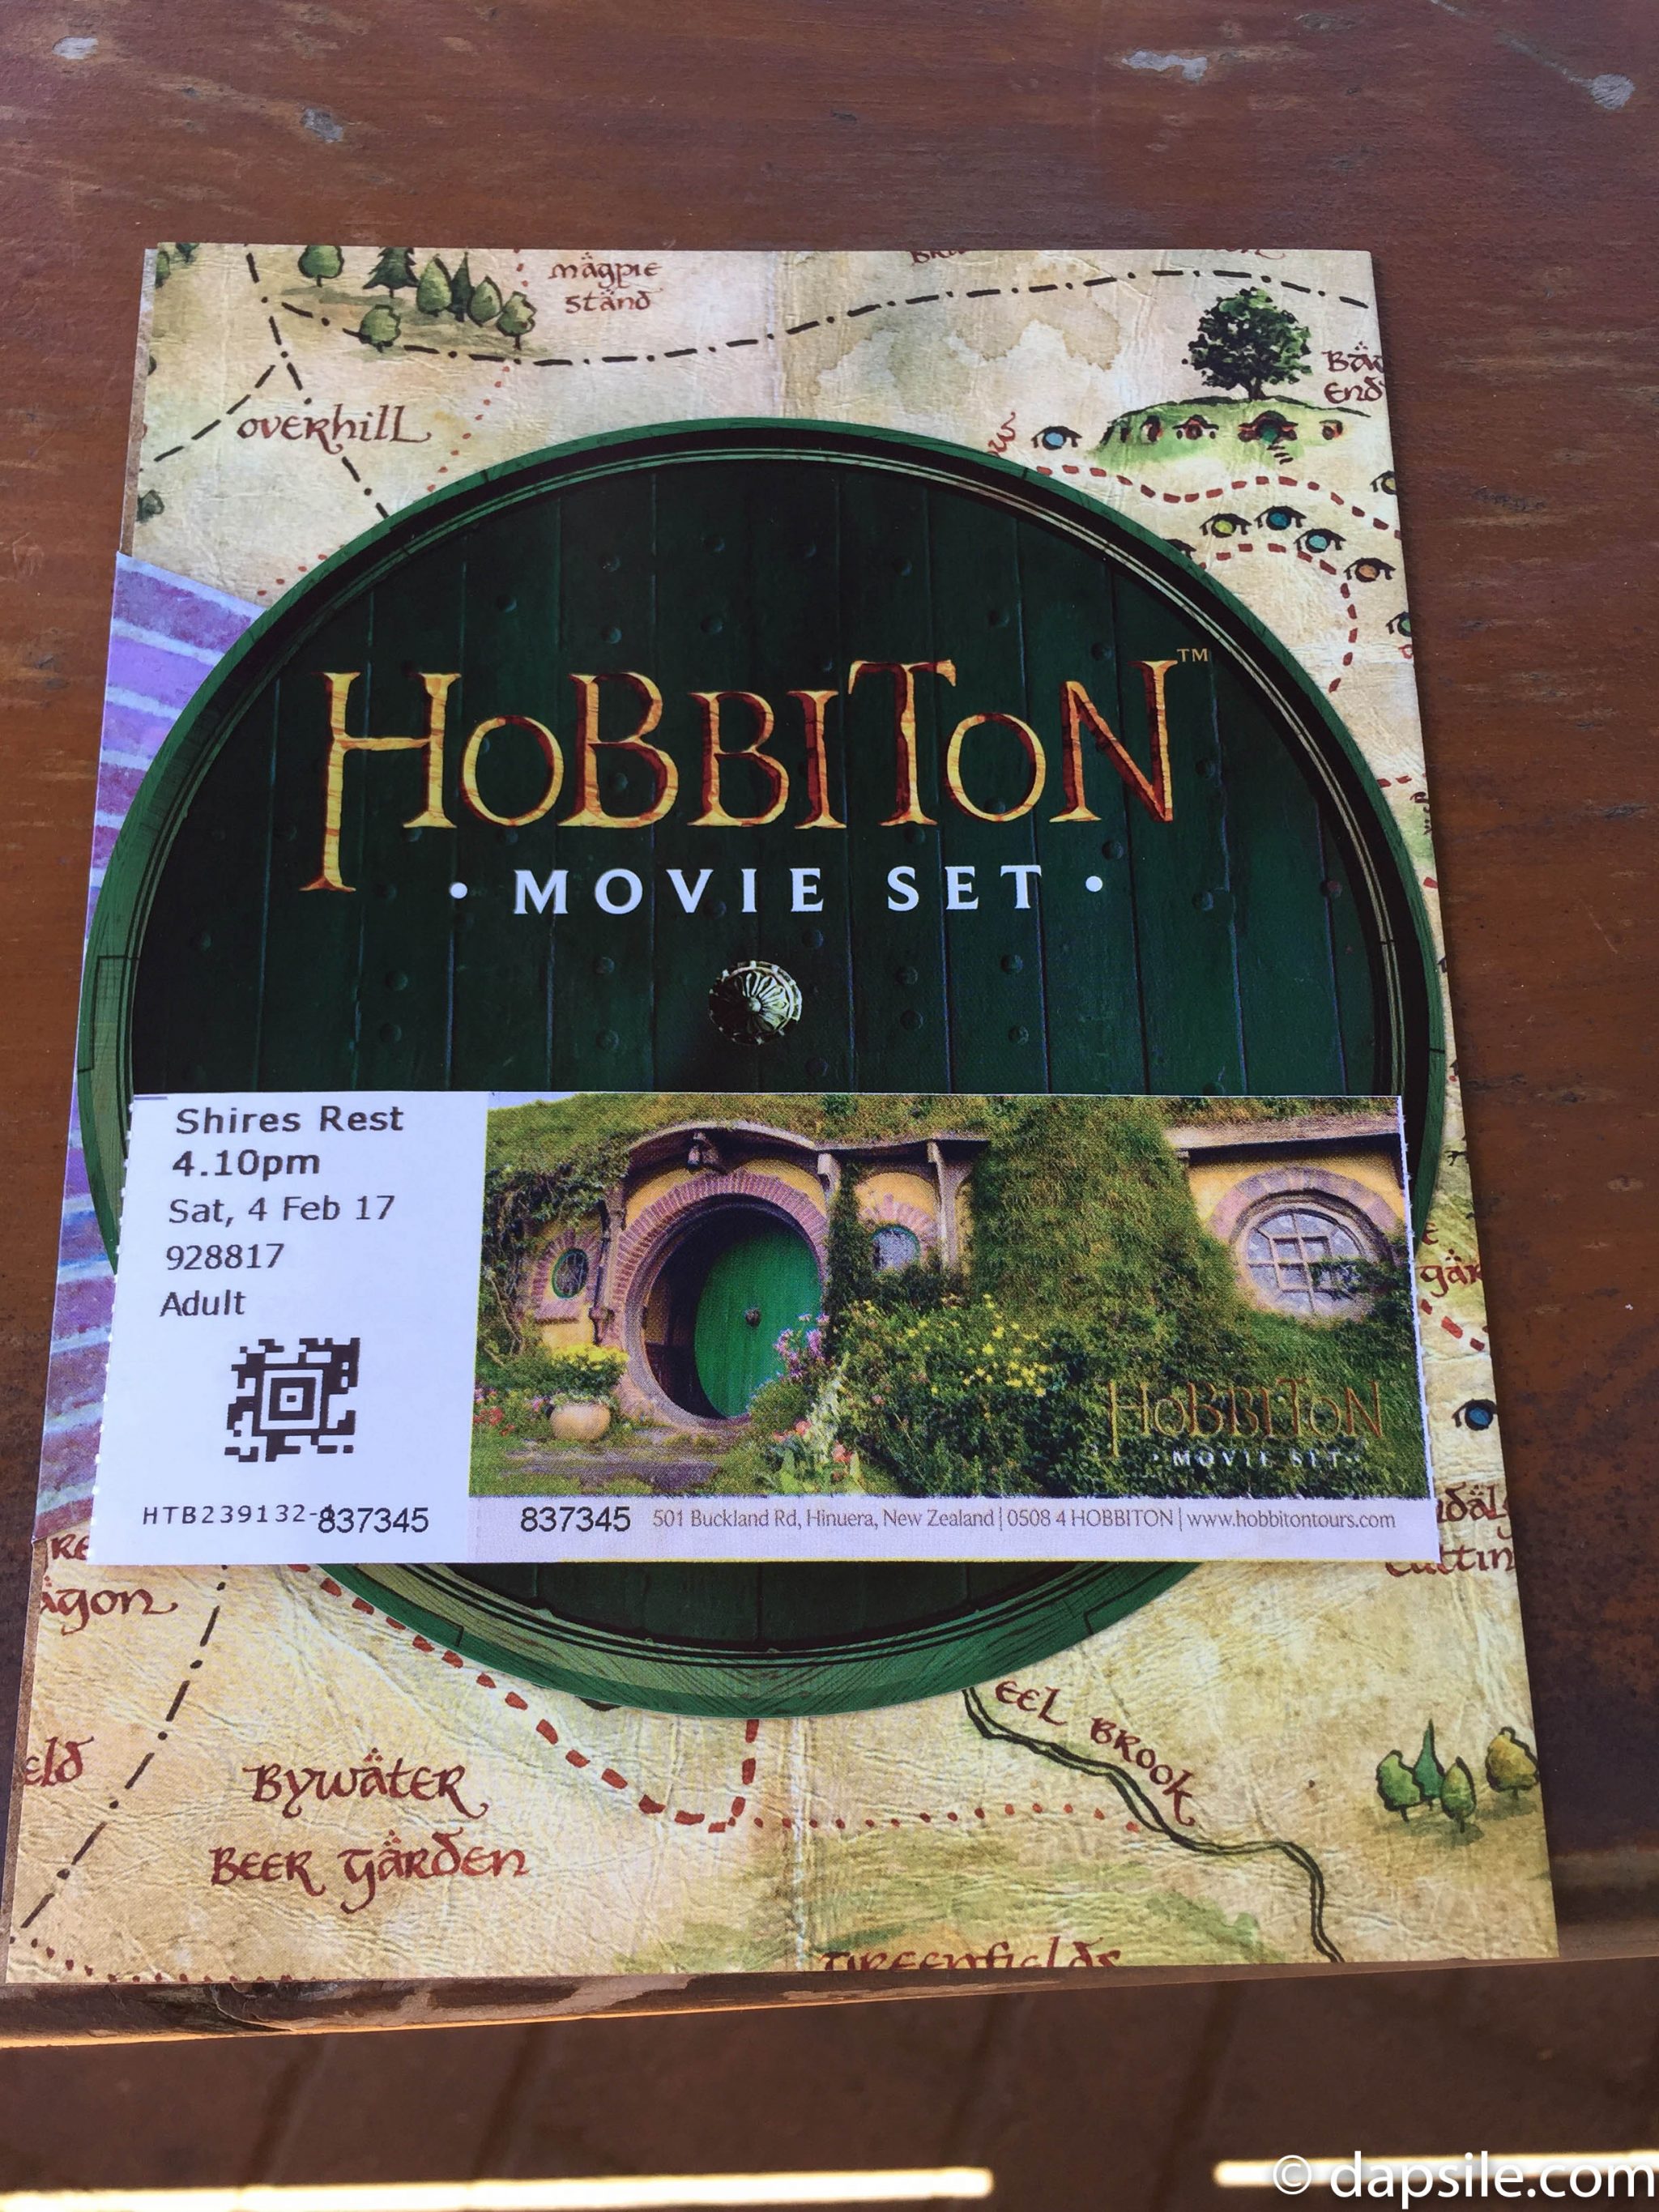 Hobbiton Pamphlet and Ticket